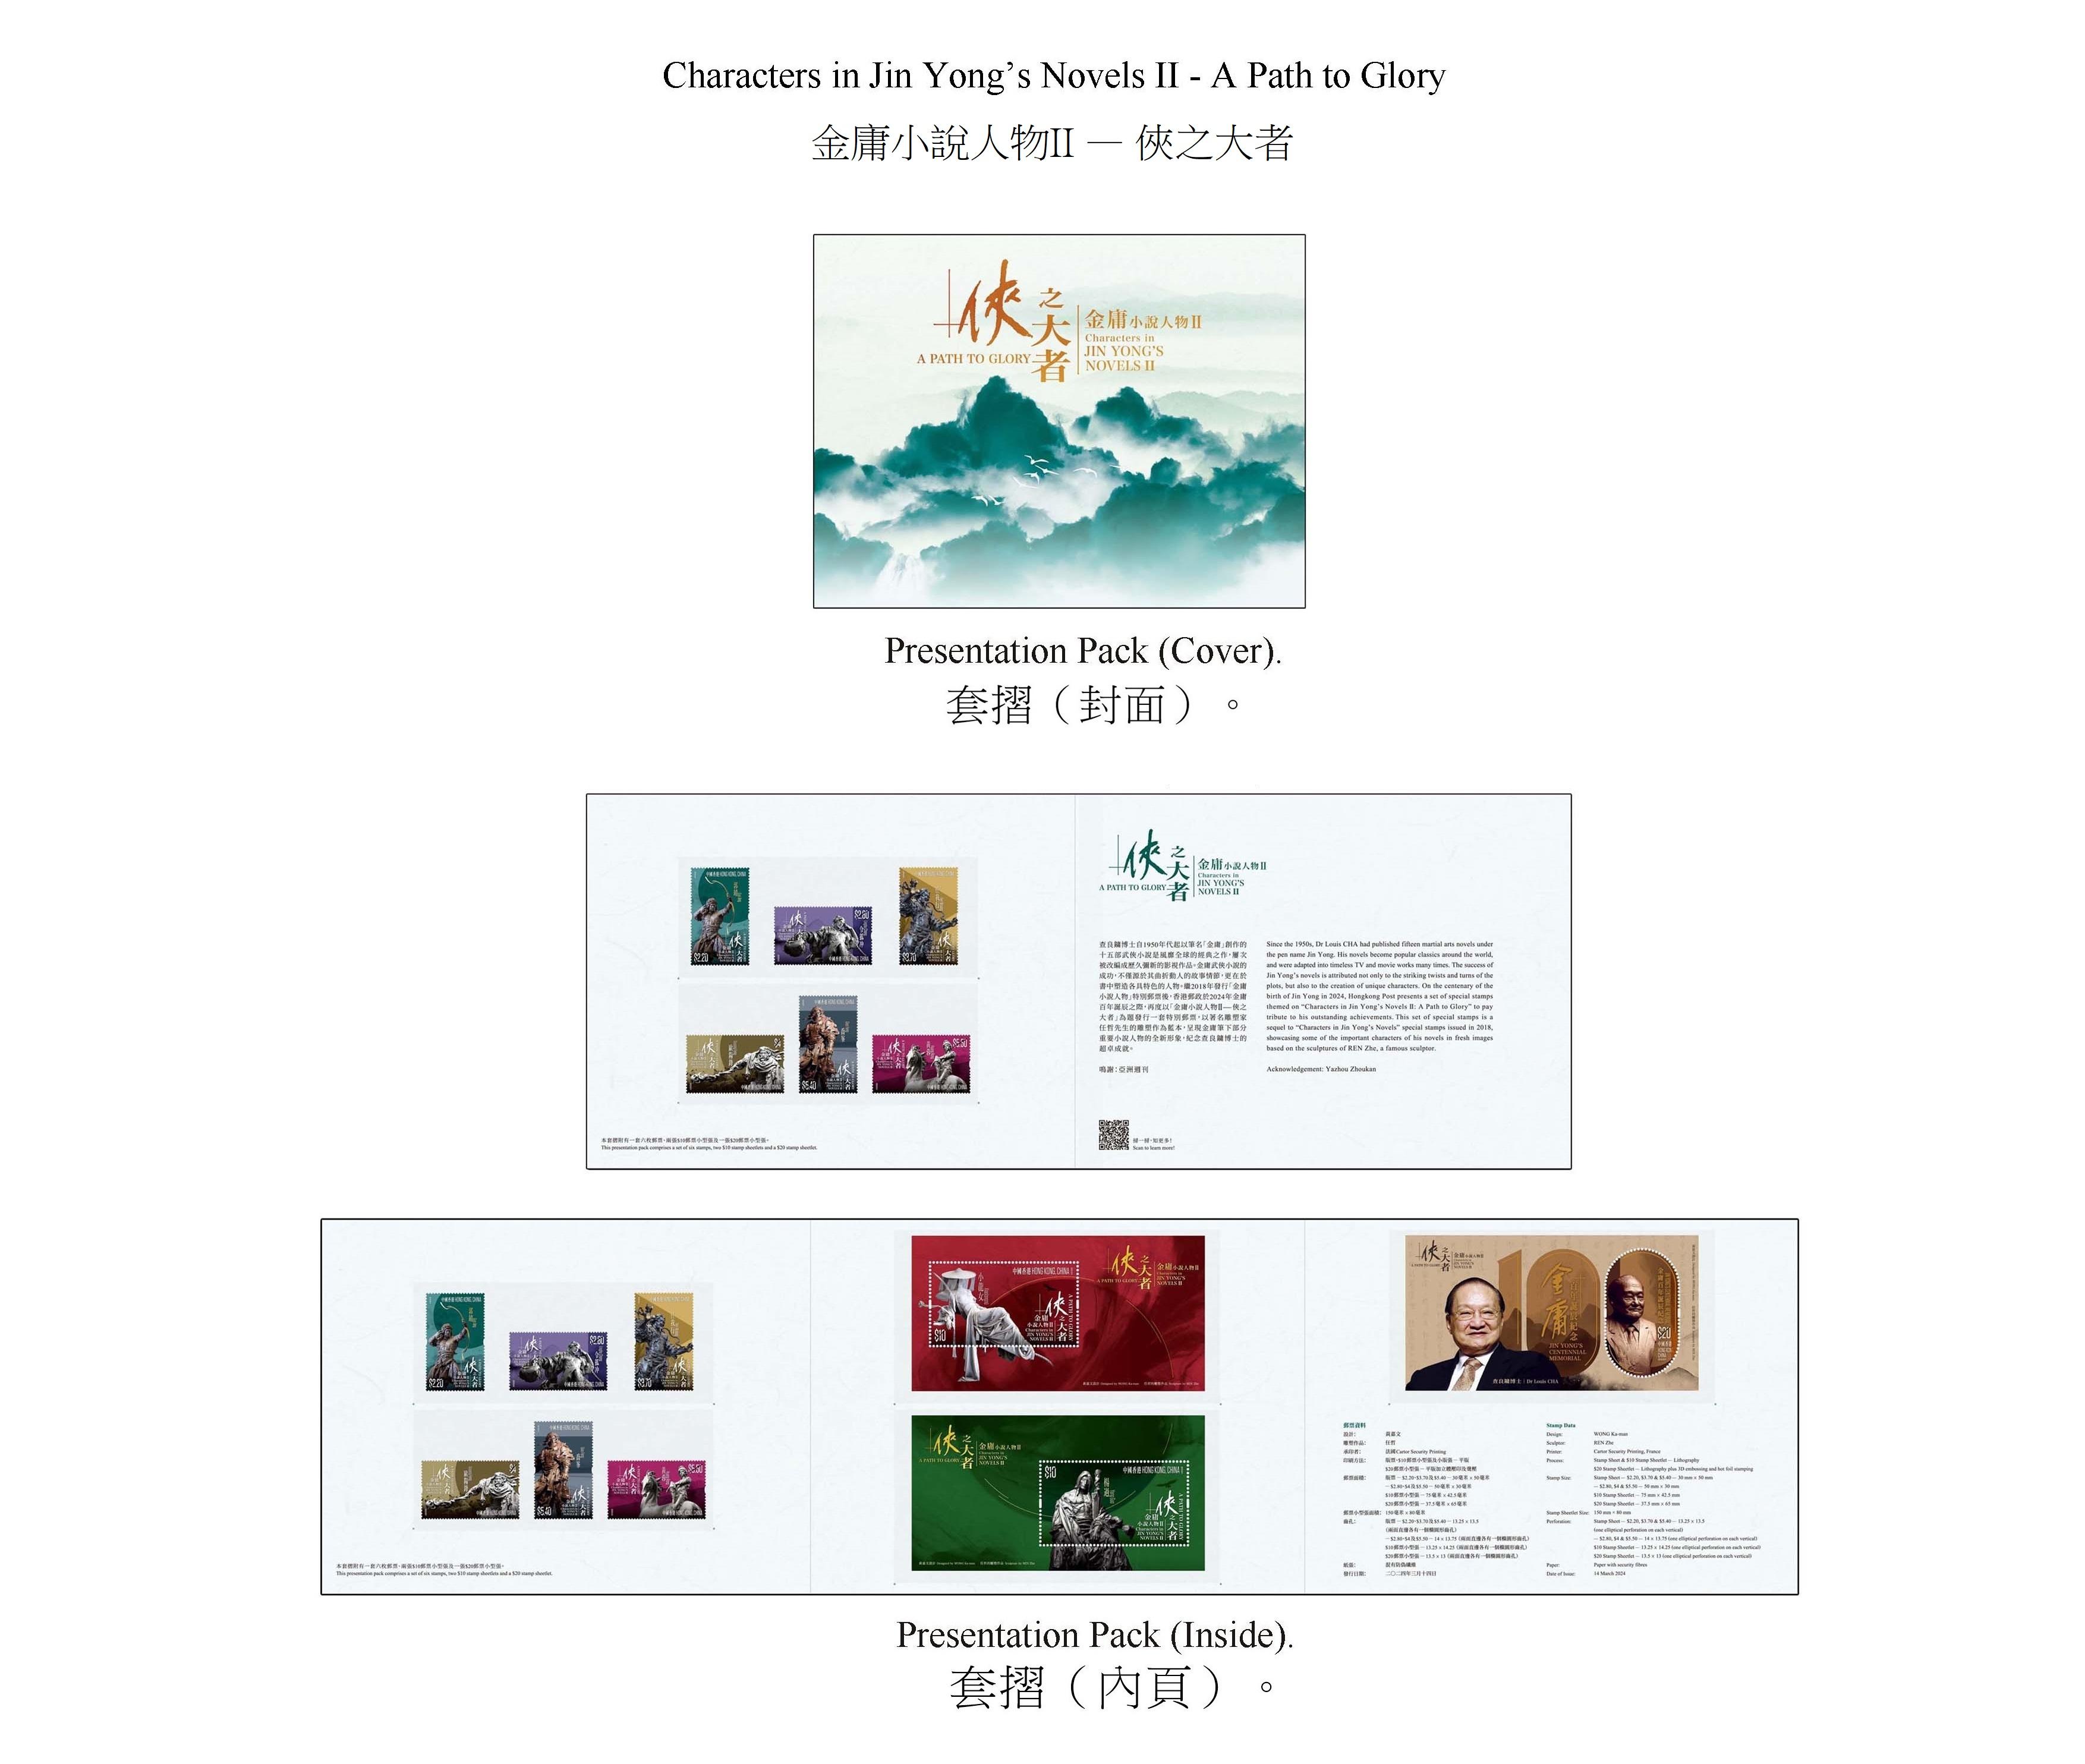 Hongkong Post will launch a special stamp issue and associated philatelic products on the theme of "Characters in Jin Yong's Novels II - A Path to Glory" on March 14 (Thursday). Photo shows the presentation pack.

